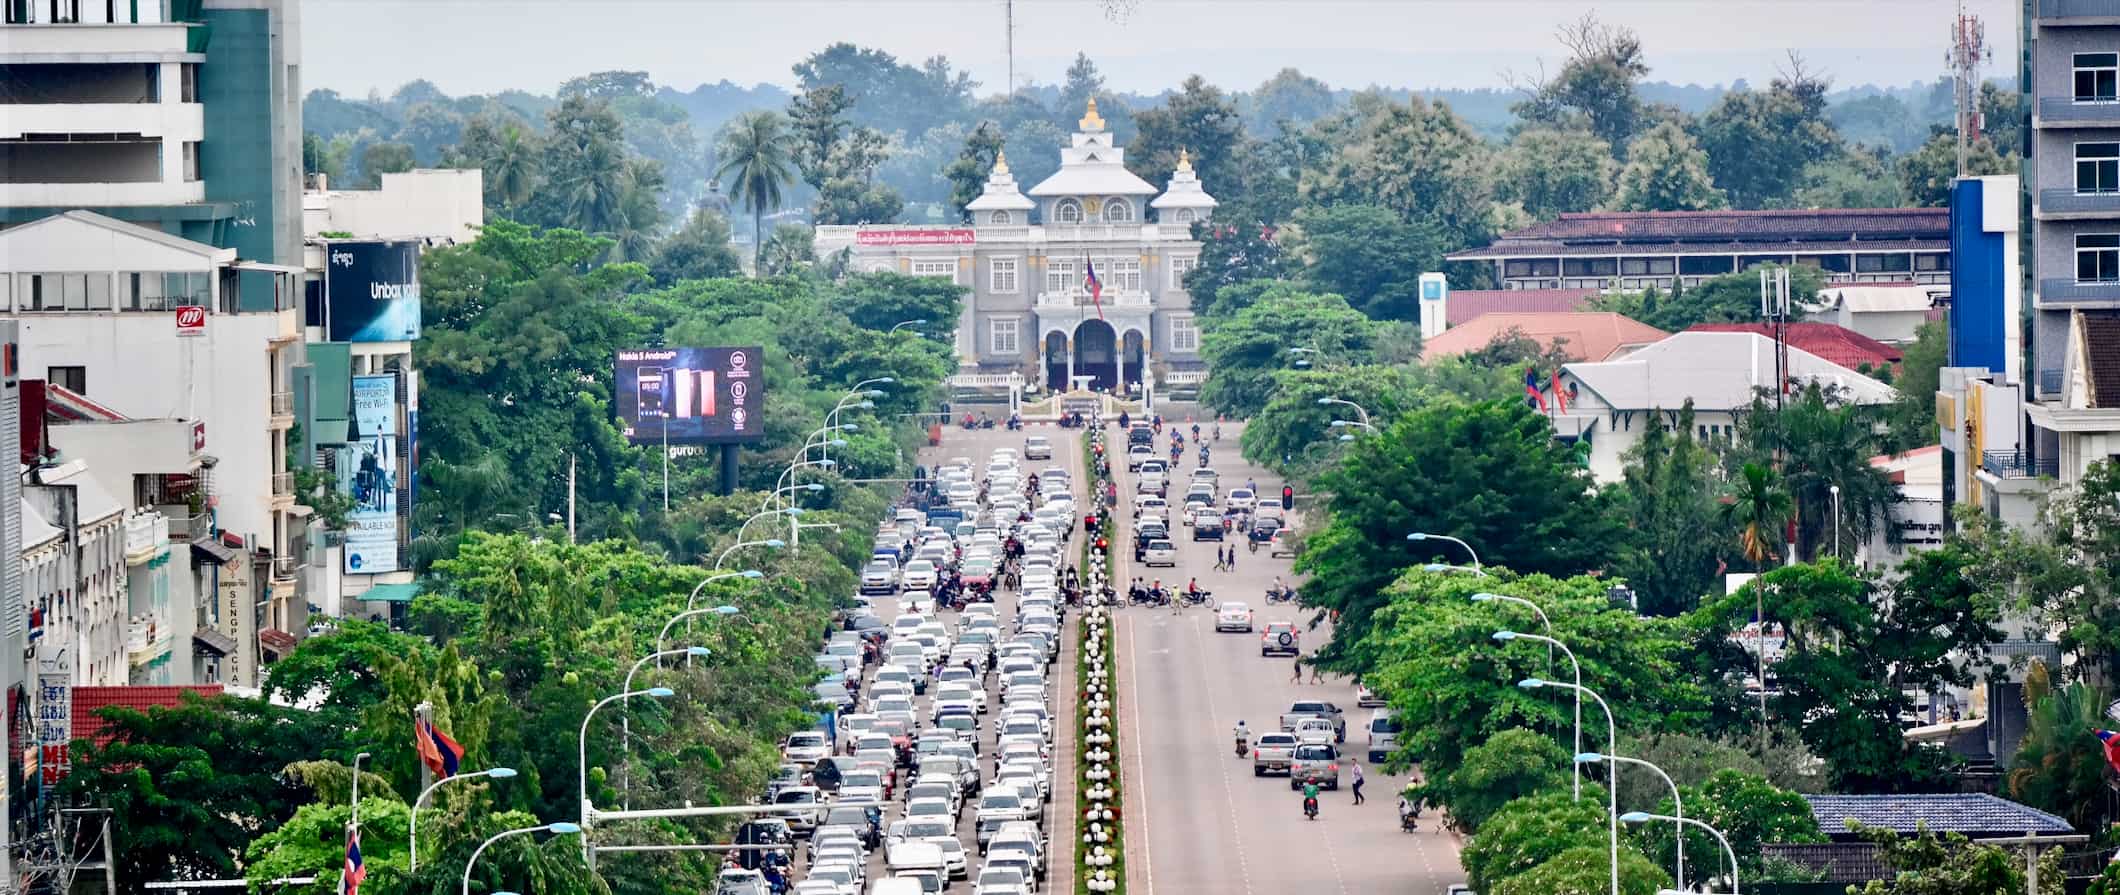 A busy, wide road full of traffic in Vientiane, the capital of Laos